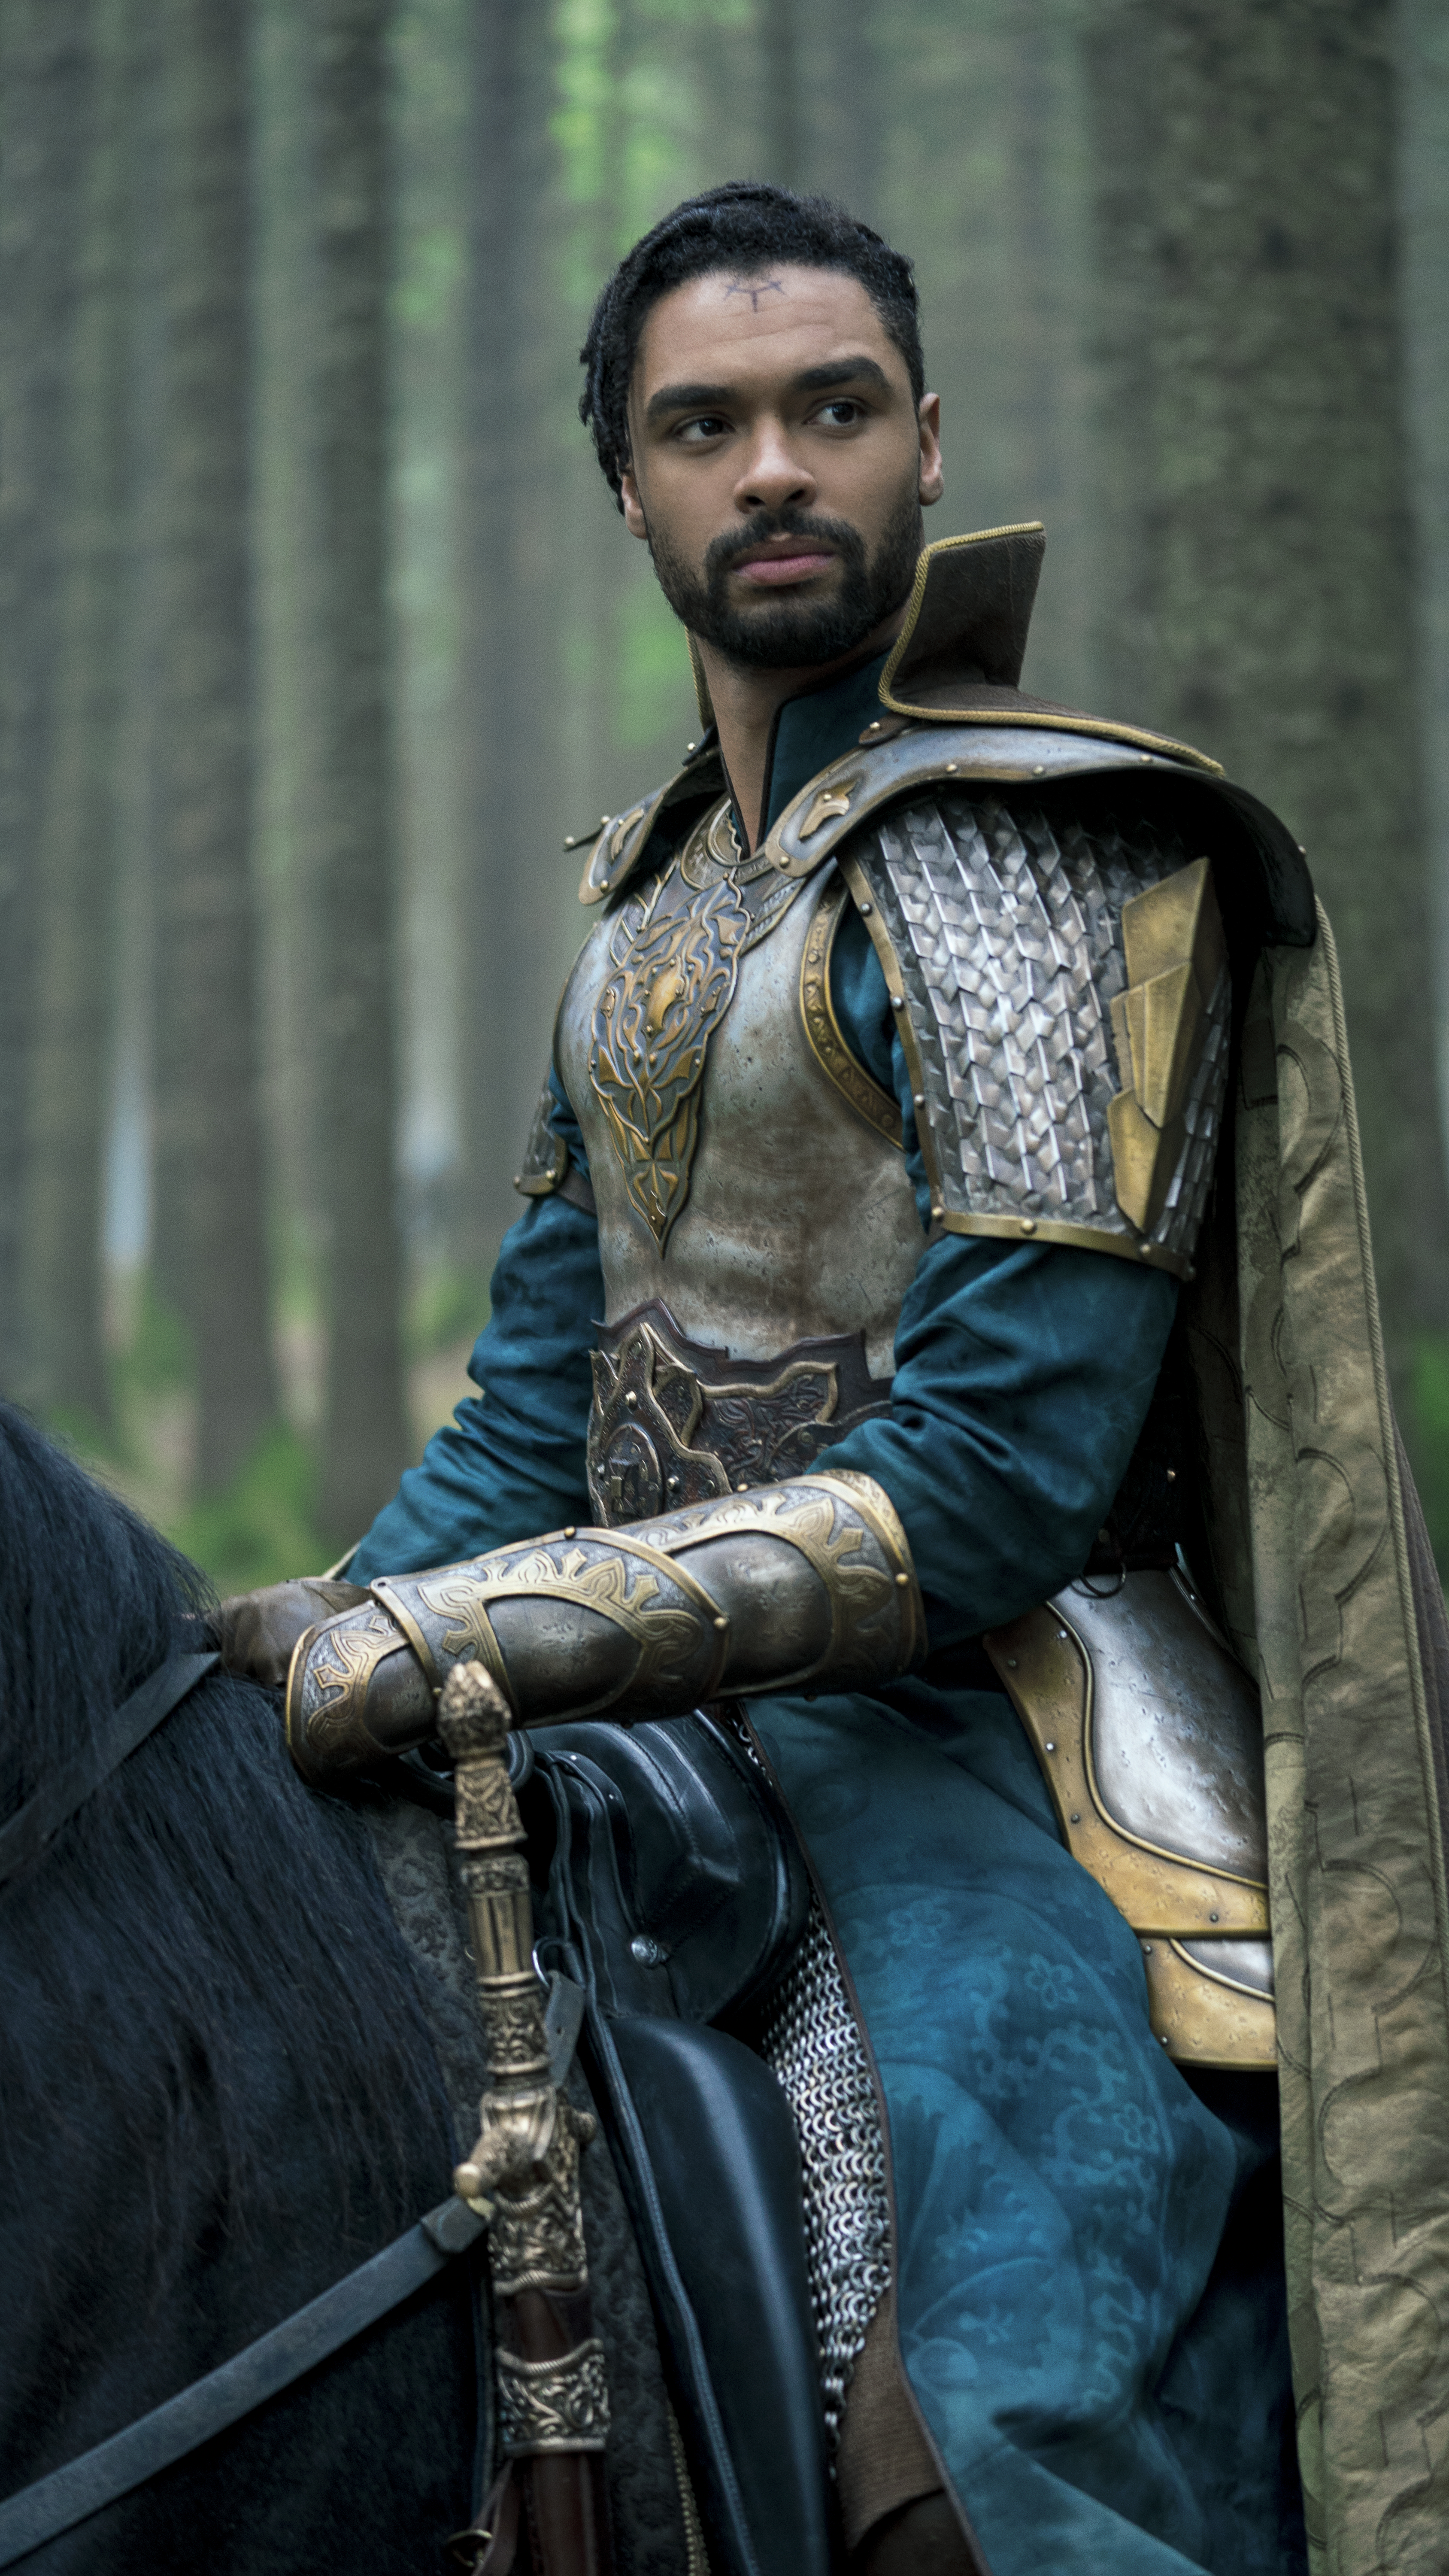 Regé-Jean Page plays Xenk in 'Dungeons & Dragons: Honor Among Thieves'. Image: Paramount Pictures / eOne / Supplied